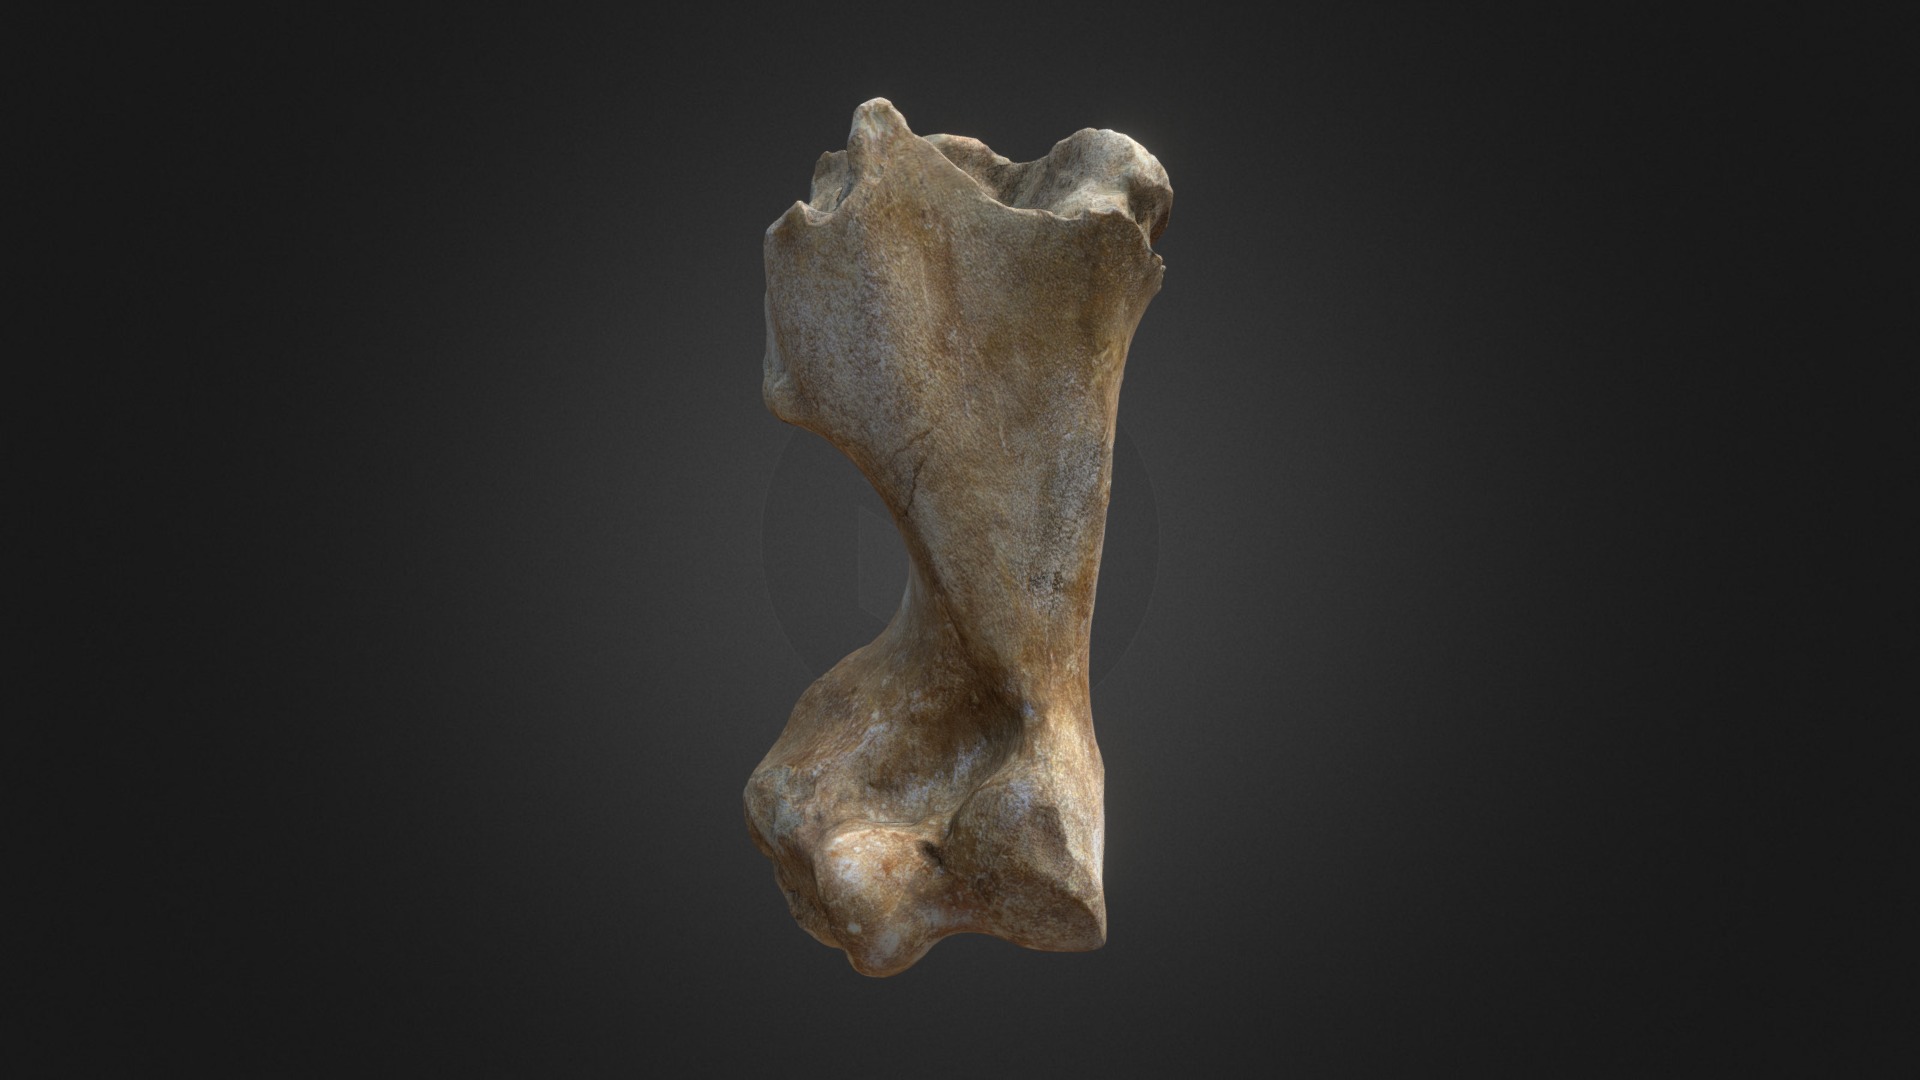 3D model Woolly Rhino Humerus - This is a 3D model of the Woolly Rhino Humerus. The 3D model is about a close-up of a human bone.